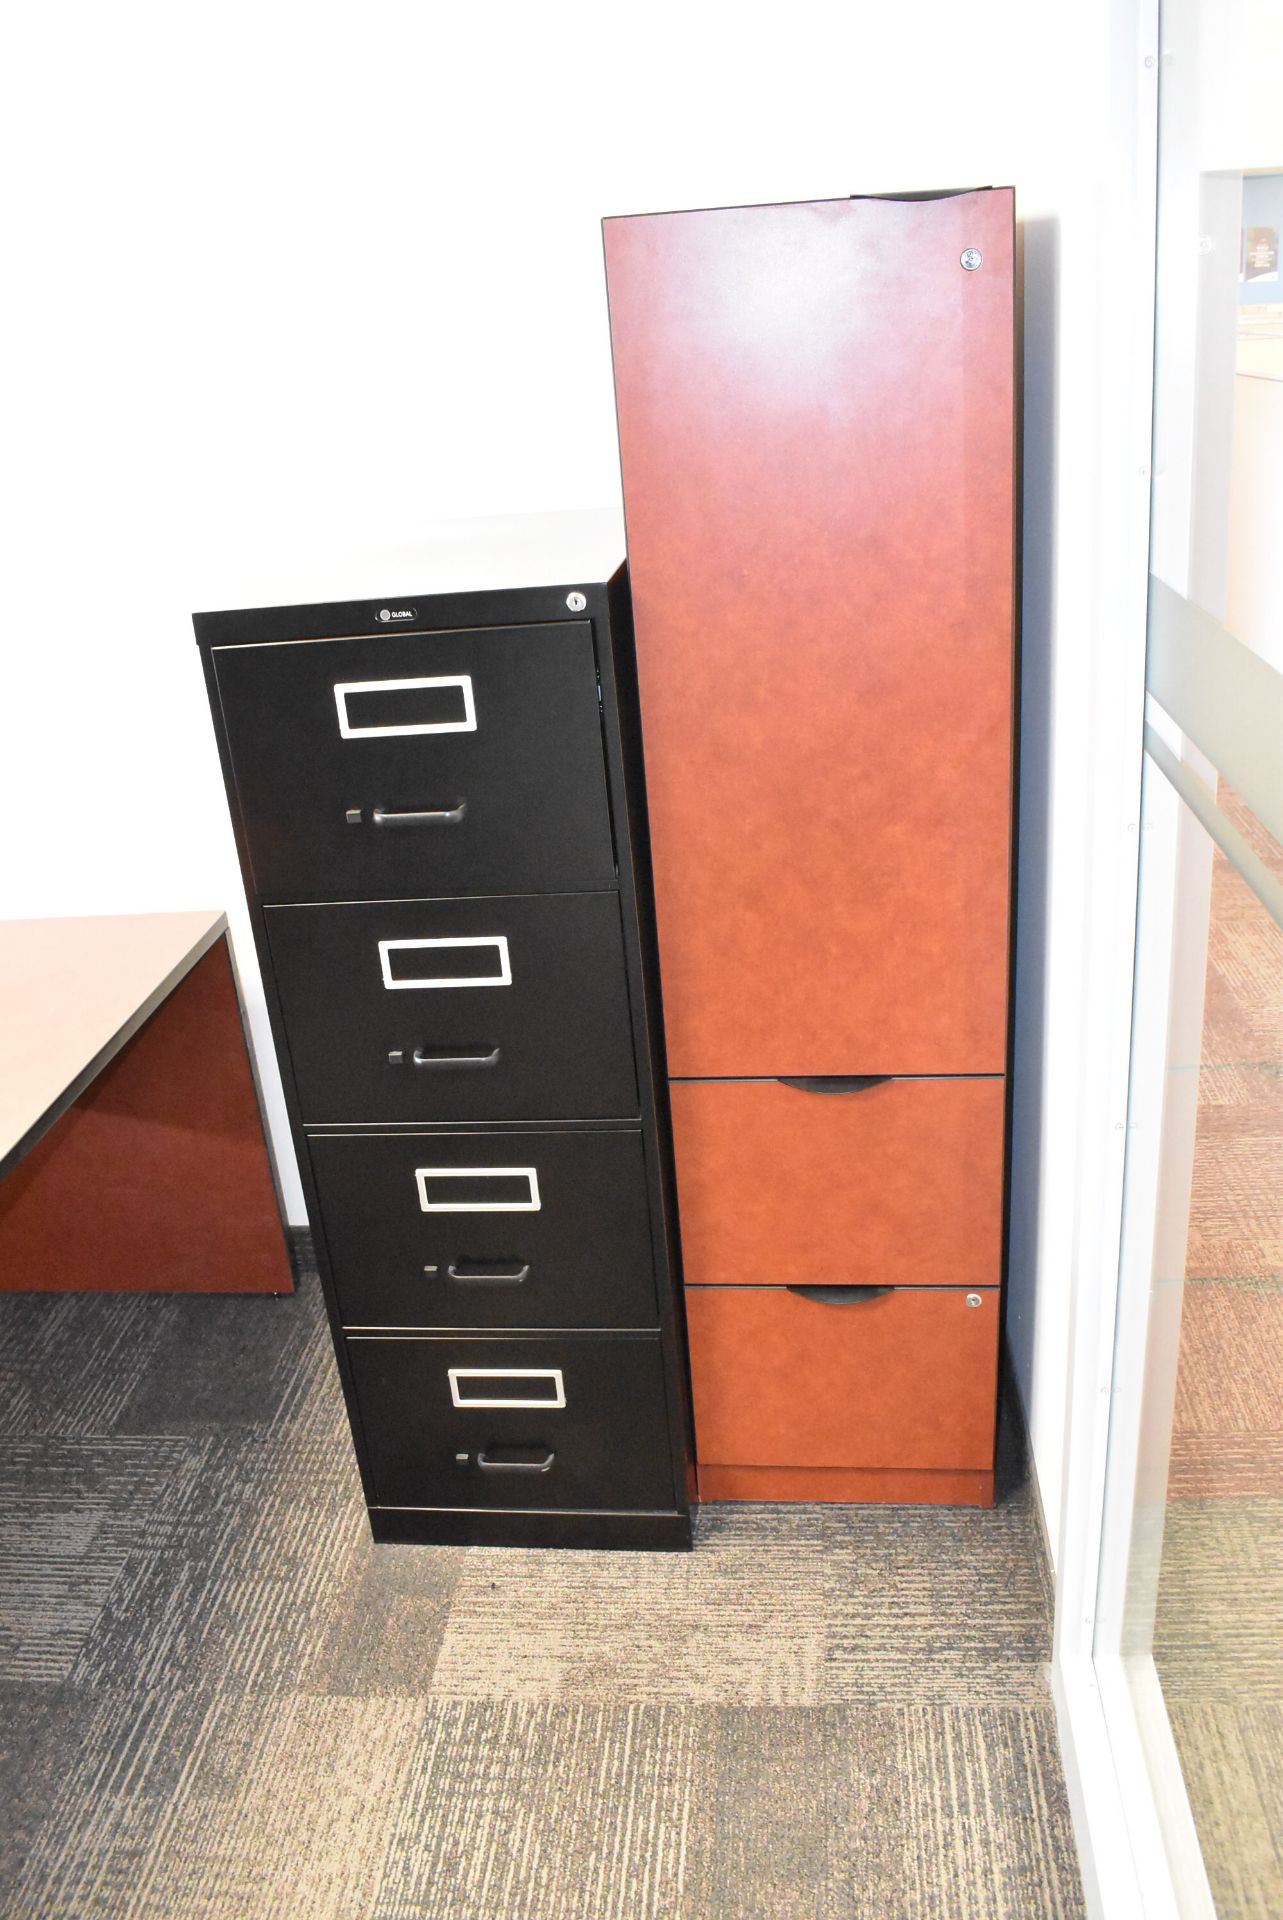 LOT/ CONTENTS OF OFFICE CONSISTING OF DESK WITH OFFICE CHAIR, 4-DRAWER FILE CABINET & STORAGE - Image 2 of 2